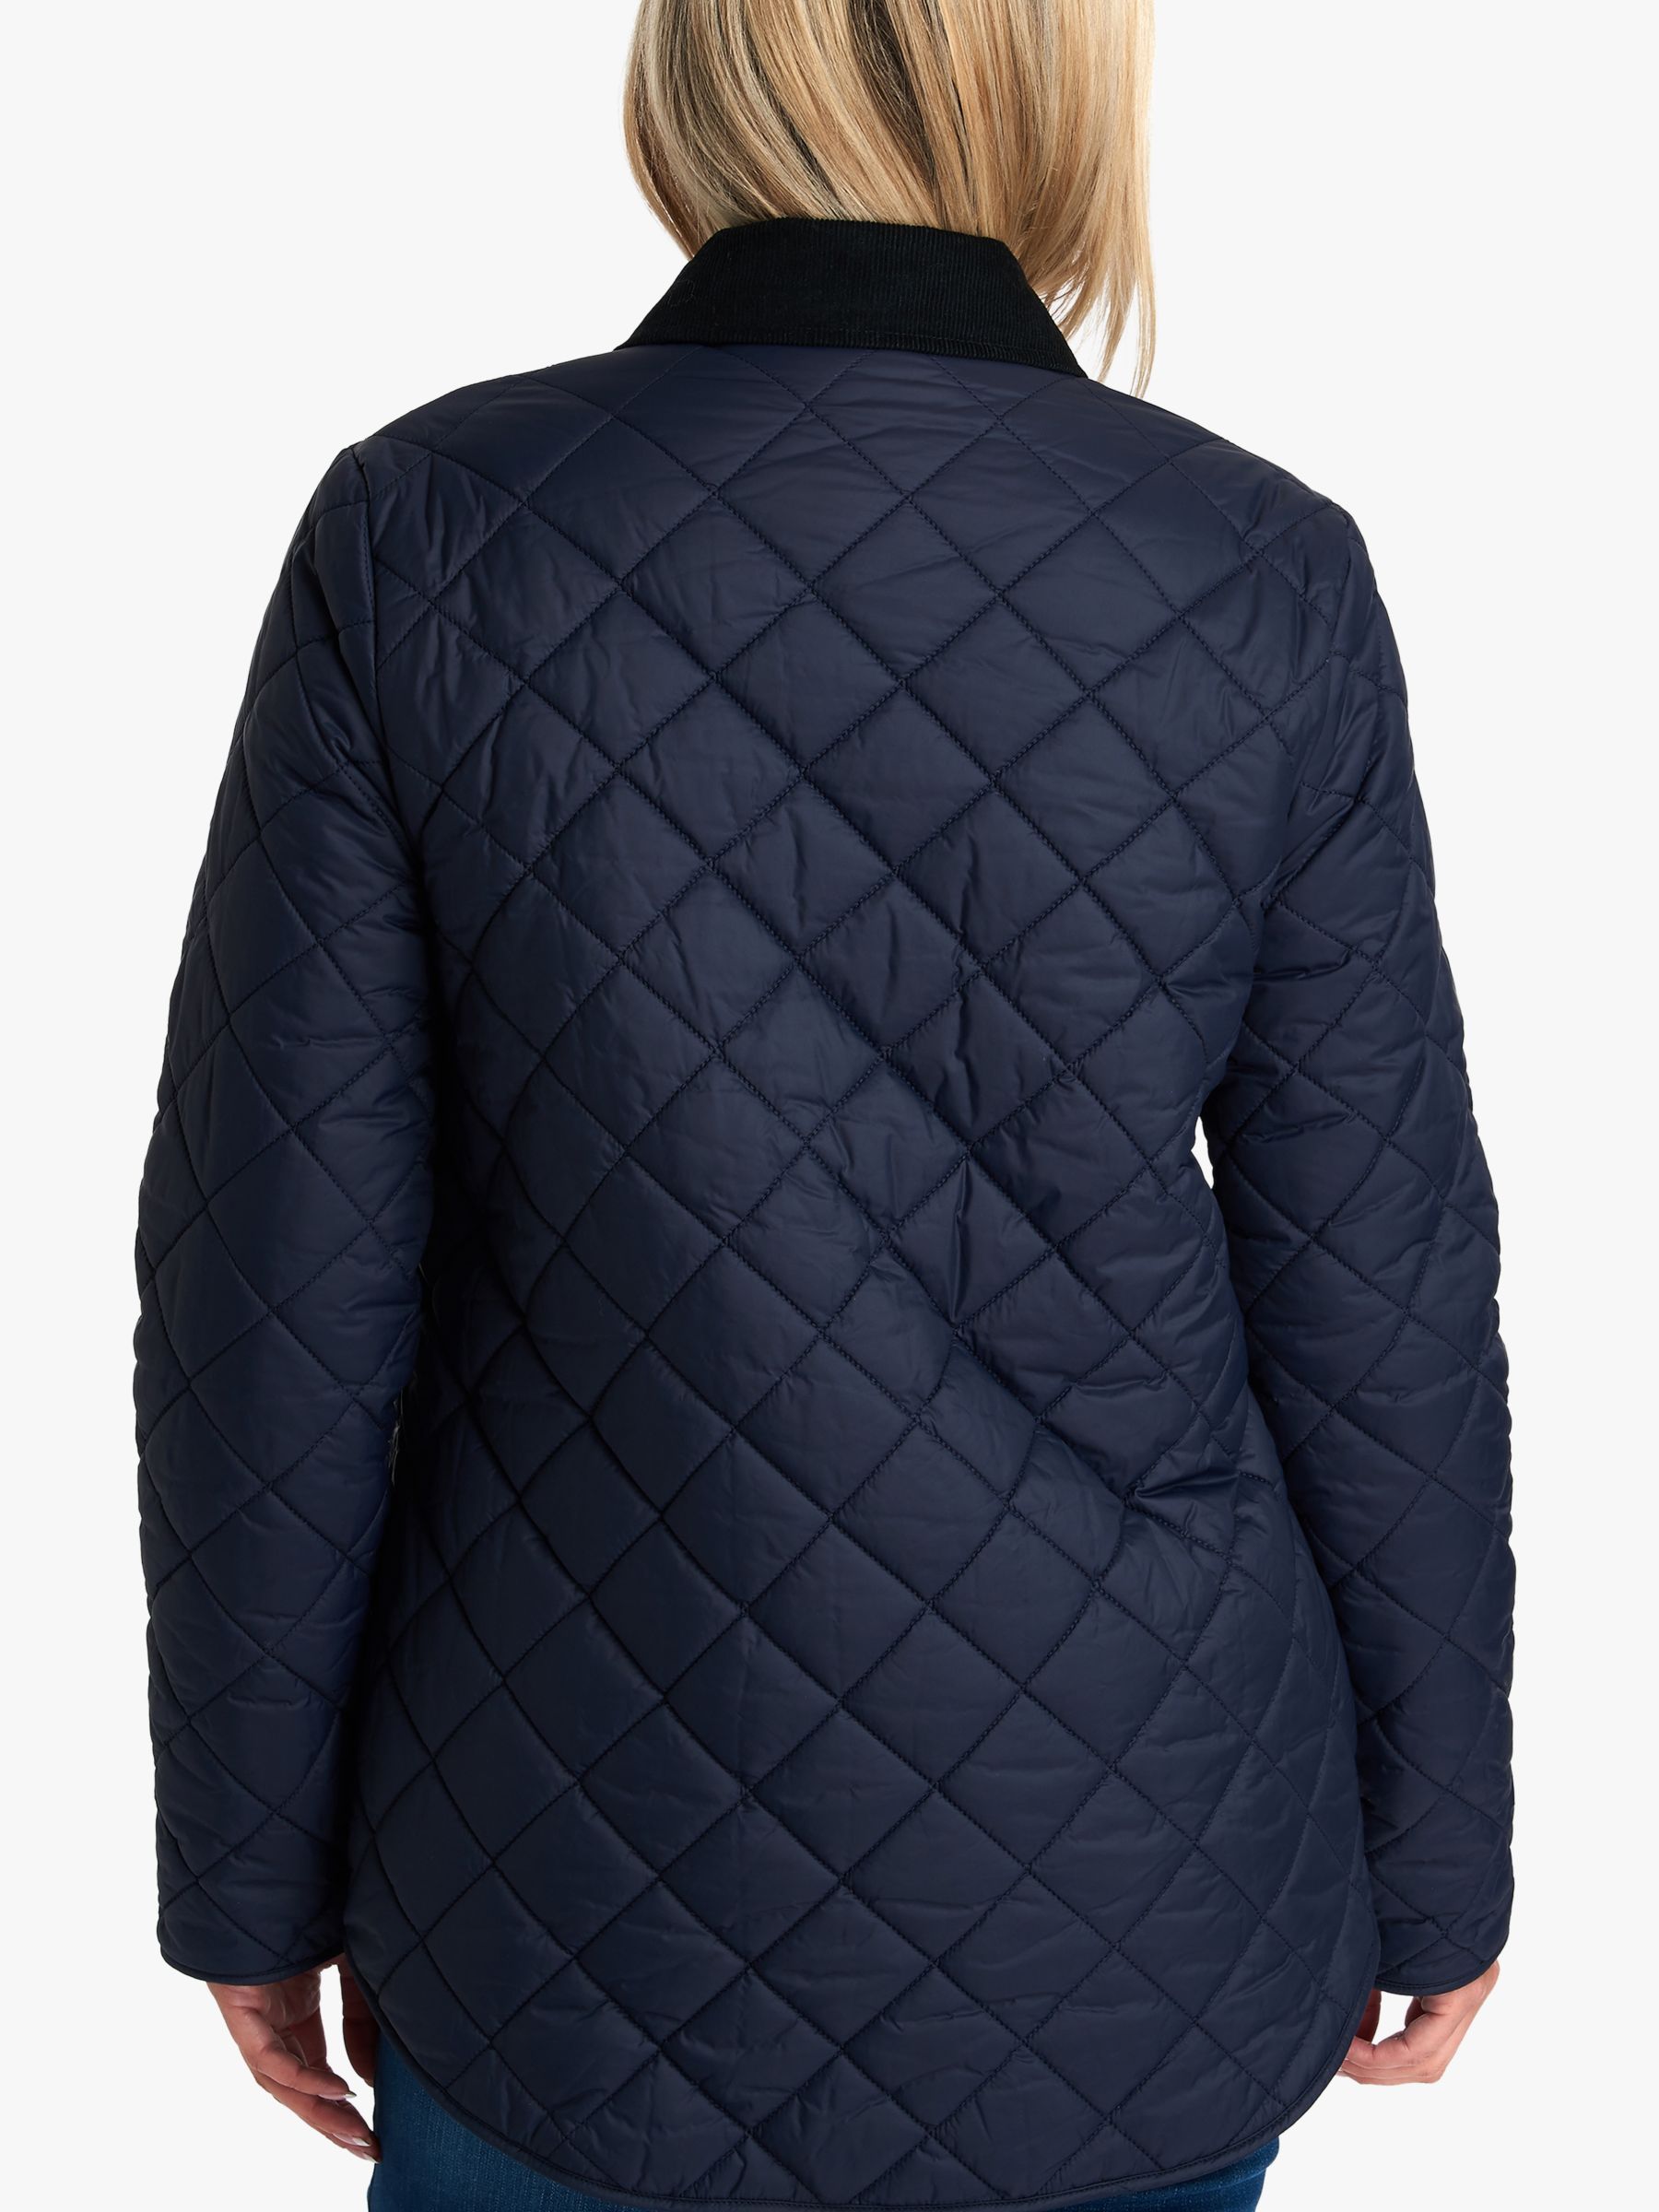 Barbour National Trust Moors Quilted Jacket, Navy, 12